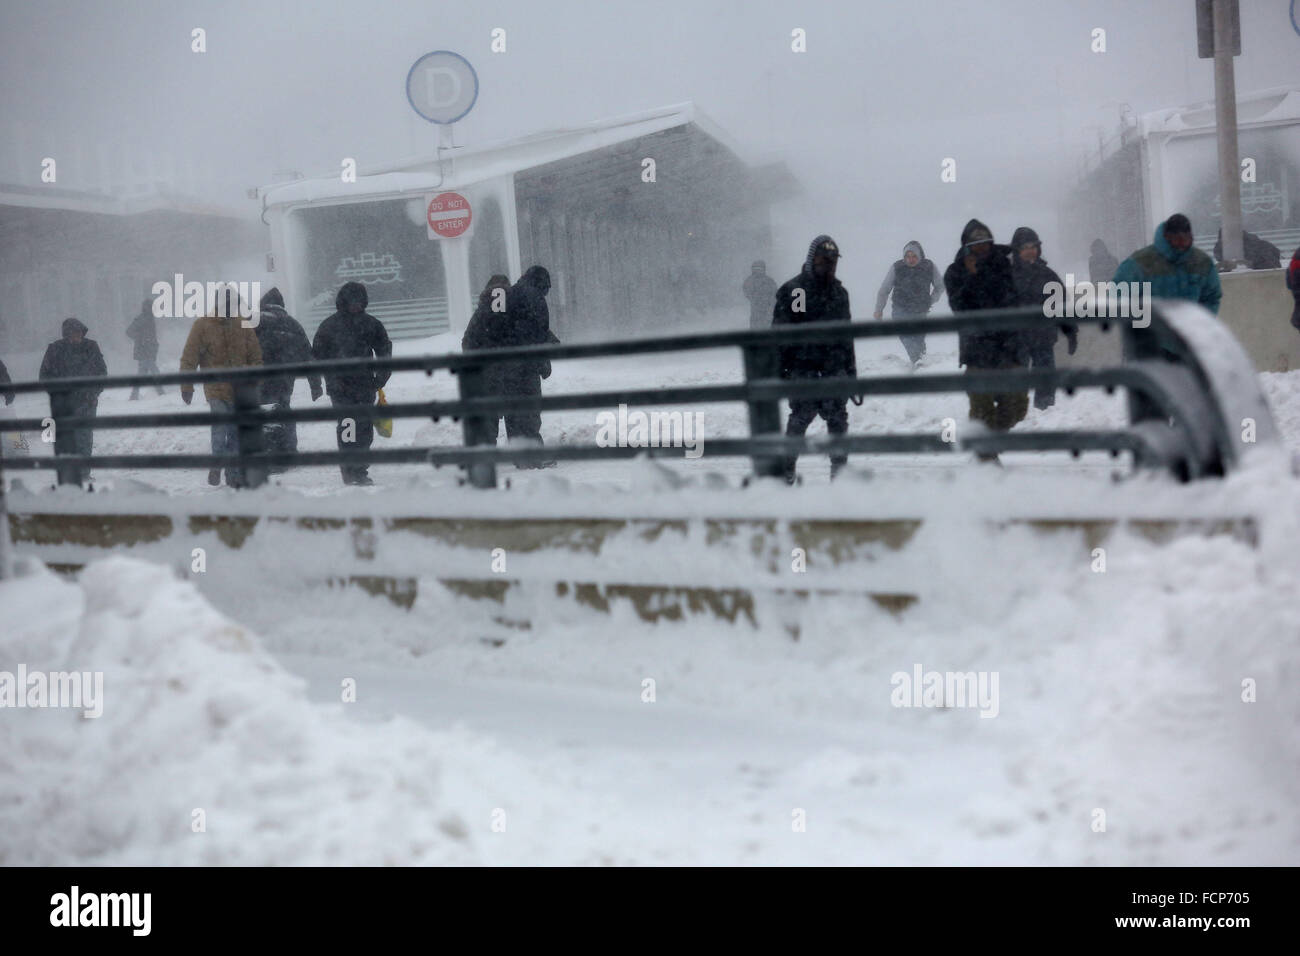 Staten Island, NY, USA. 23rd Jan, 2016. People walk away from the Staten Island Ferry St. George terminal during Winter Storm Jonas. A travel ban had been in place for hours, but the ferry still operated. Snowfall projections for Staten Island were approximately 12-18in, with winds gusting up to 50 miles an hour. Late afternoon, buses ceased to run and a travel ban was enforced by the NYPD. This lack of transportation stranded many residents of Staten Island who had taken the ferry home. People were forced to try and walk to their destination in the blizzard. New York Governor Andrew Cuomo de Stock Photo